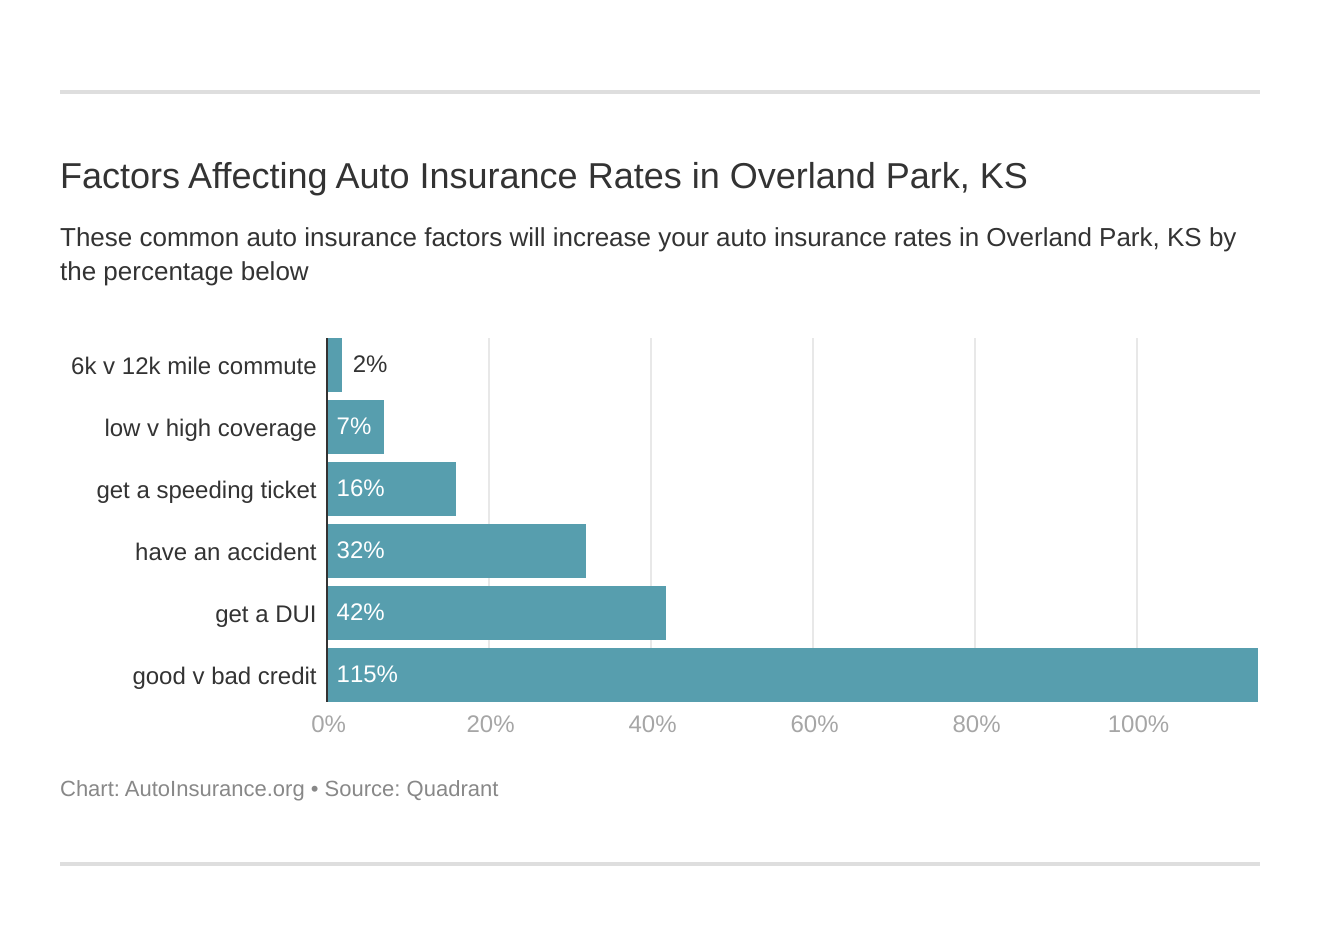 Factors Affecting Auto Insurance Rates in Overland Park, KS